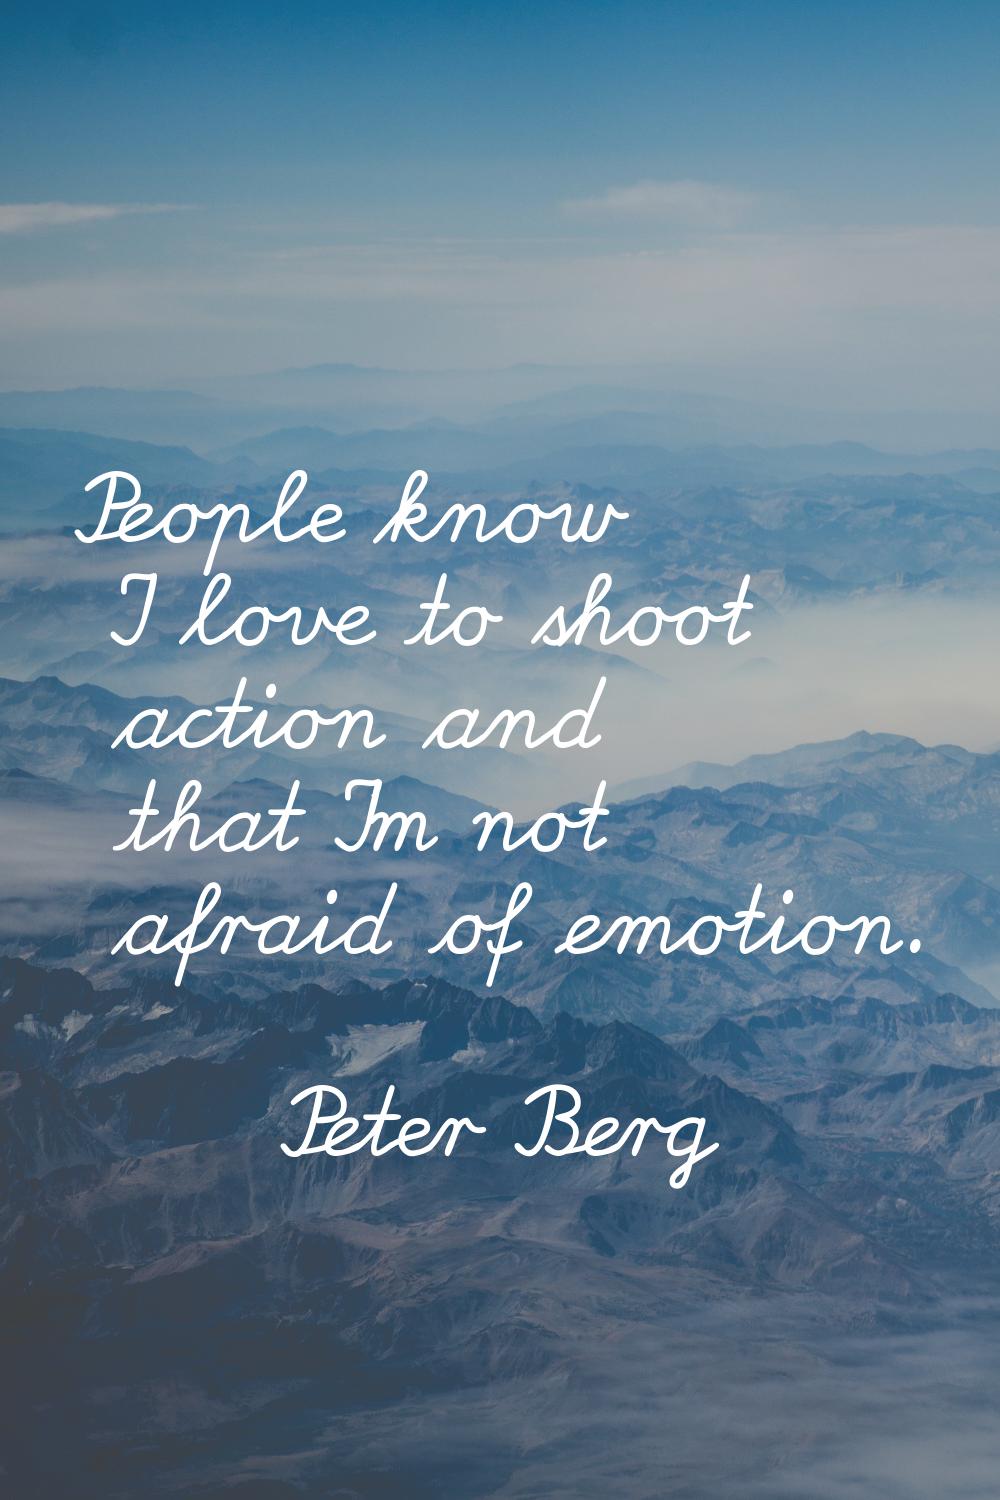 People know I love to shoot action and that I'm not afraid of emotion.